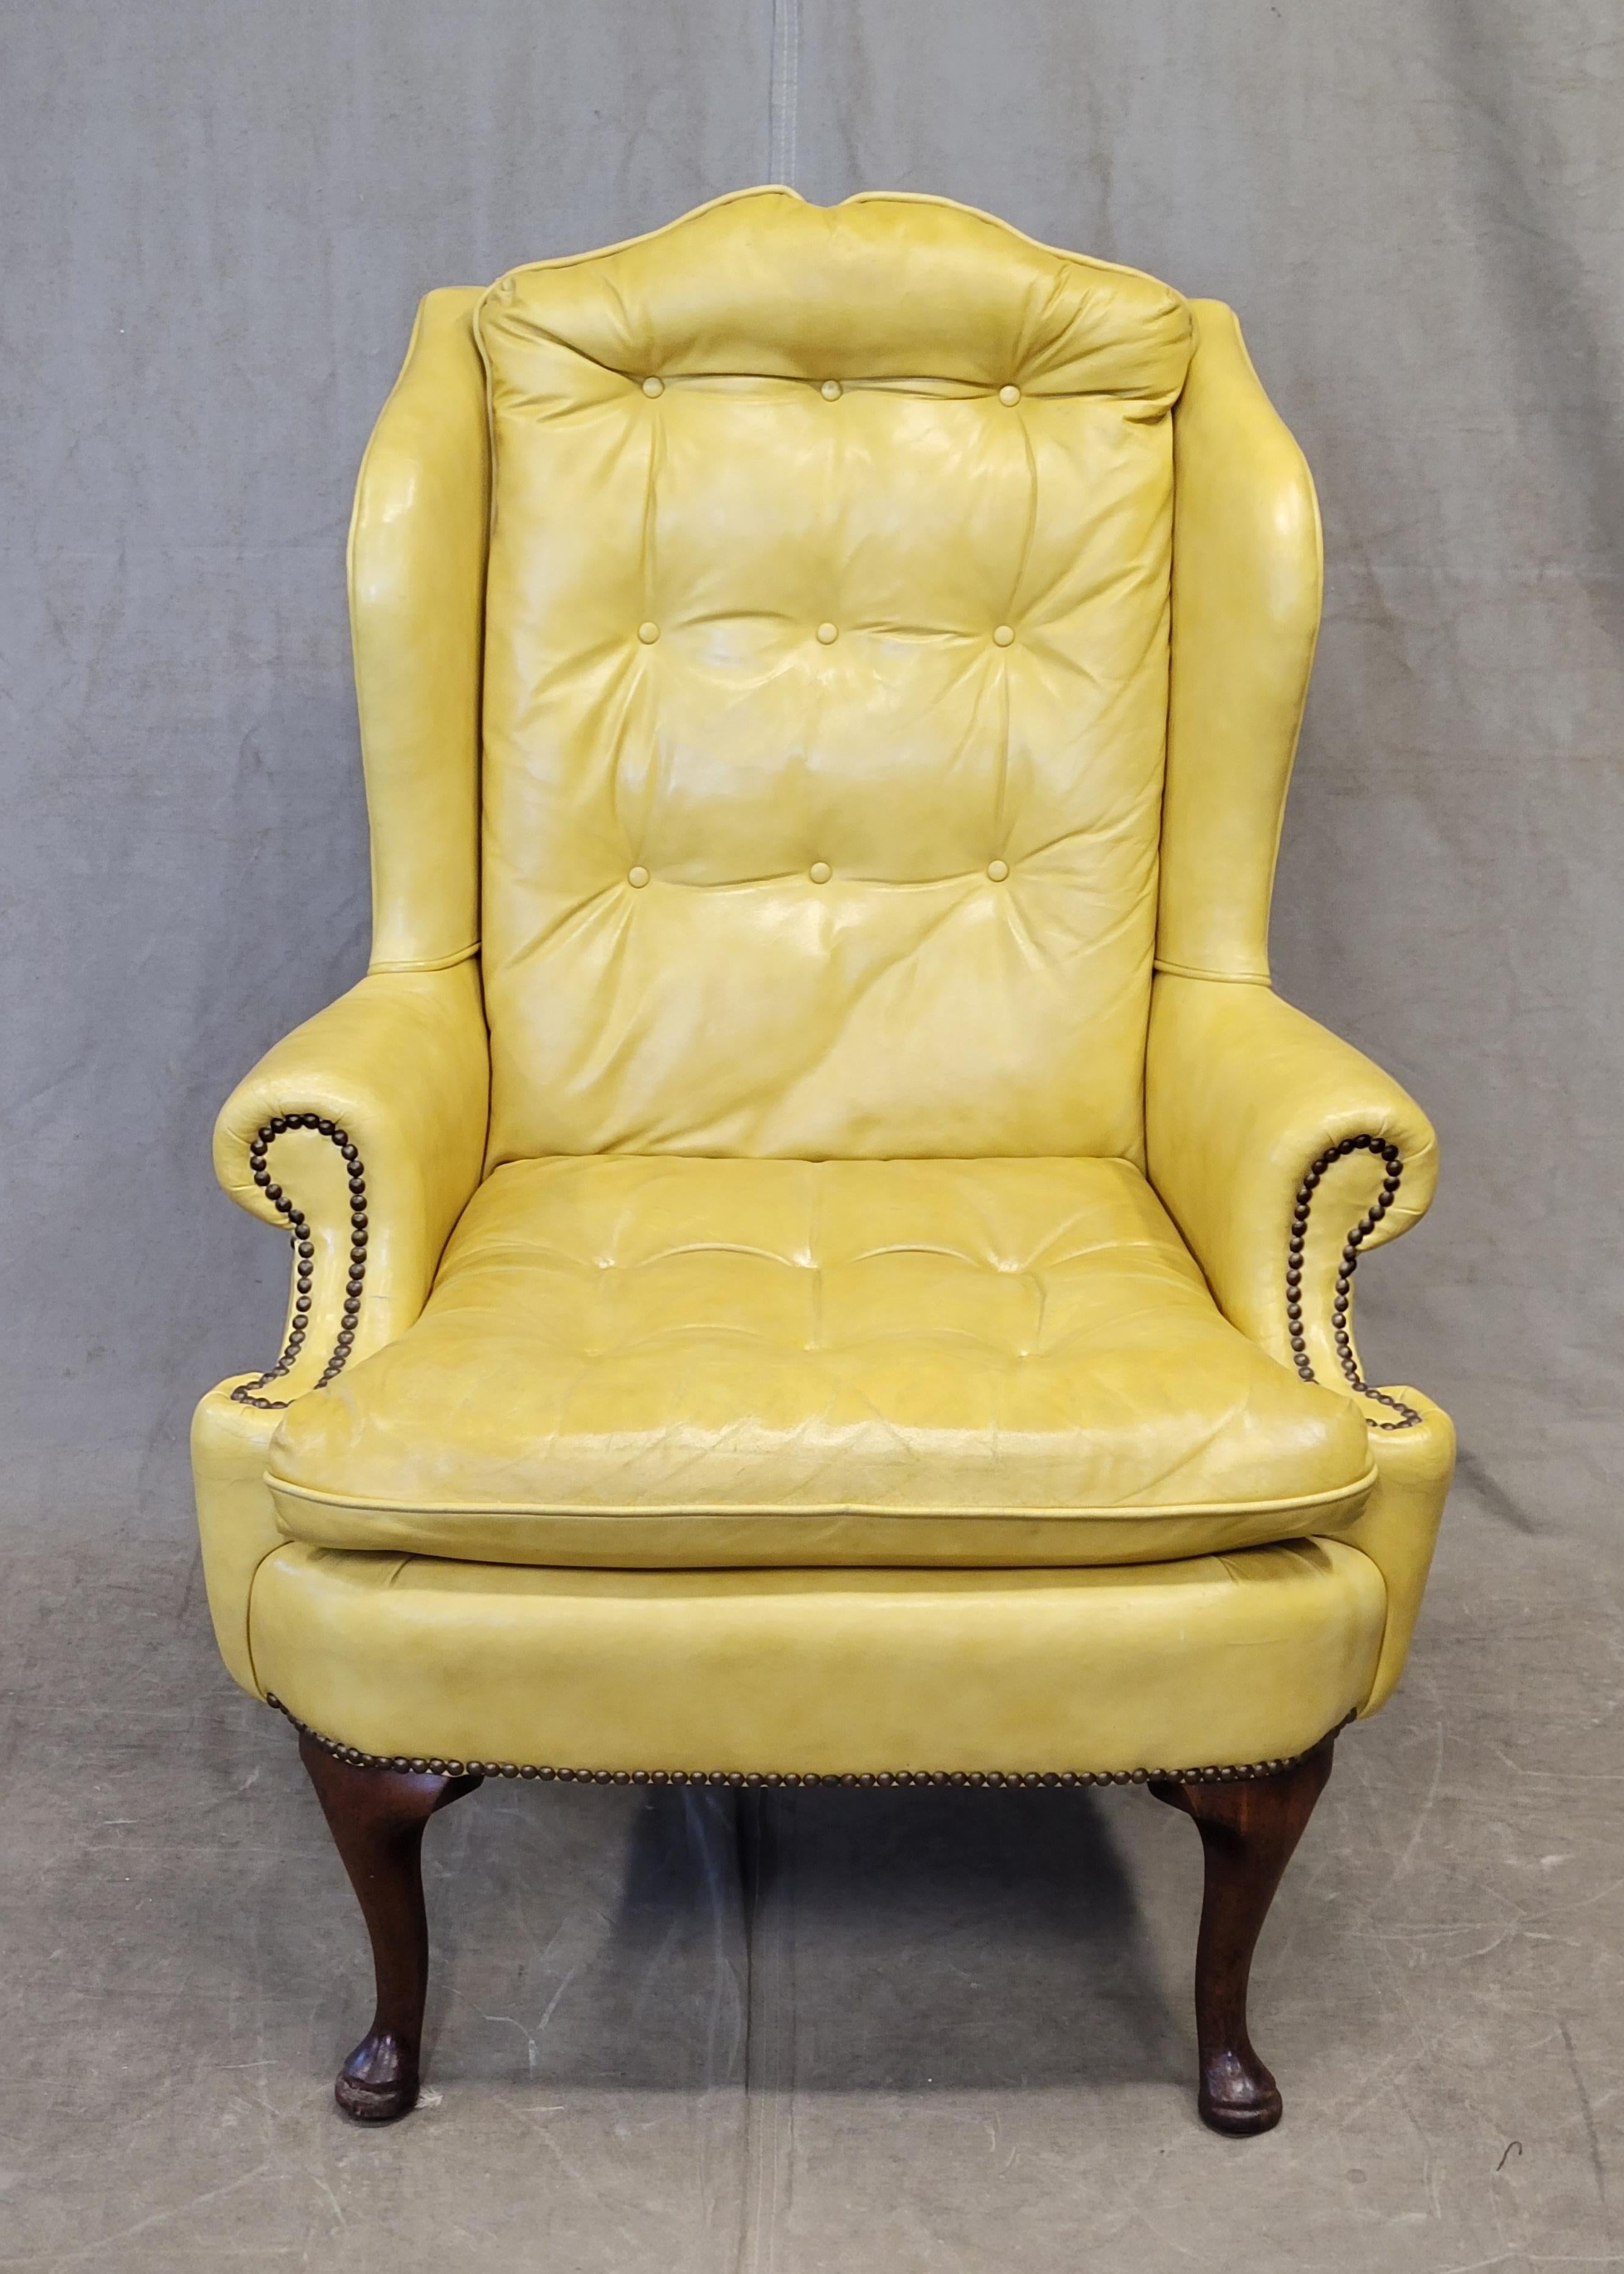 American Vintage Classic Brand Top Grain Yellow Leather Chesterfield Chairs - a Pair For Sale